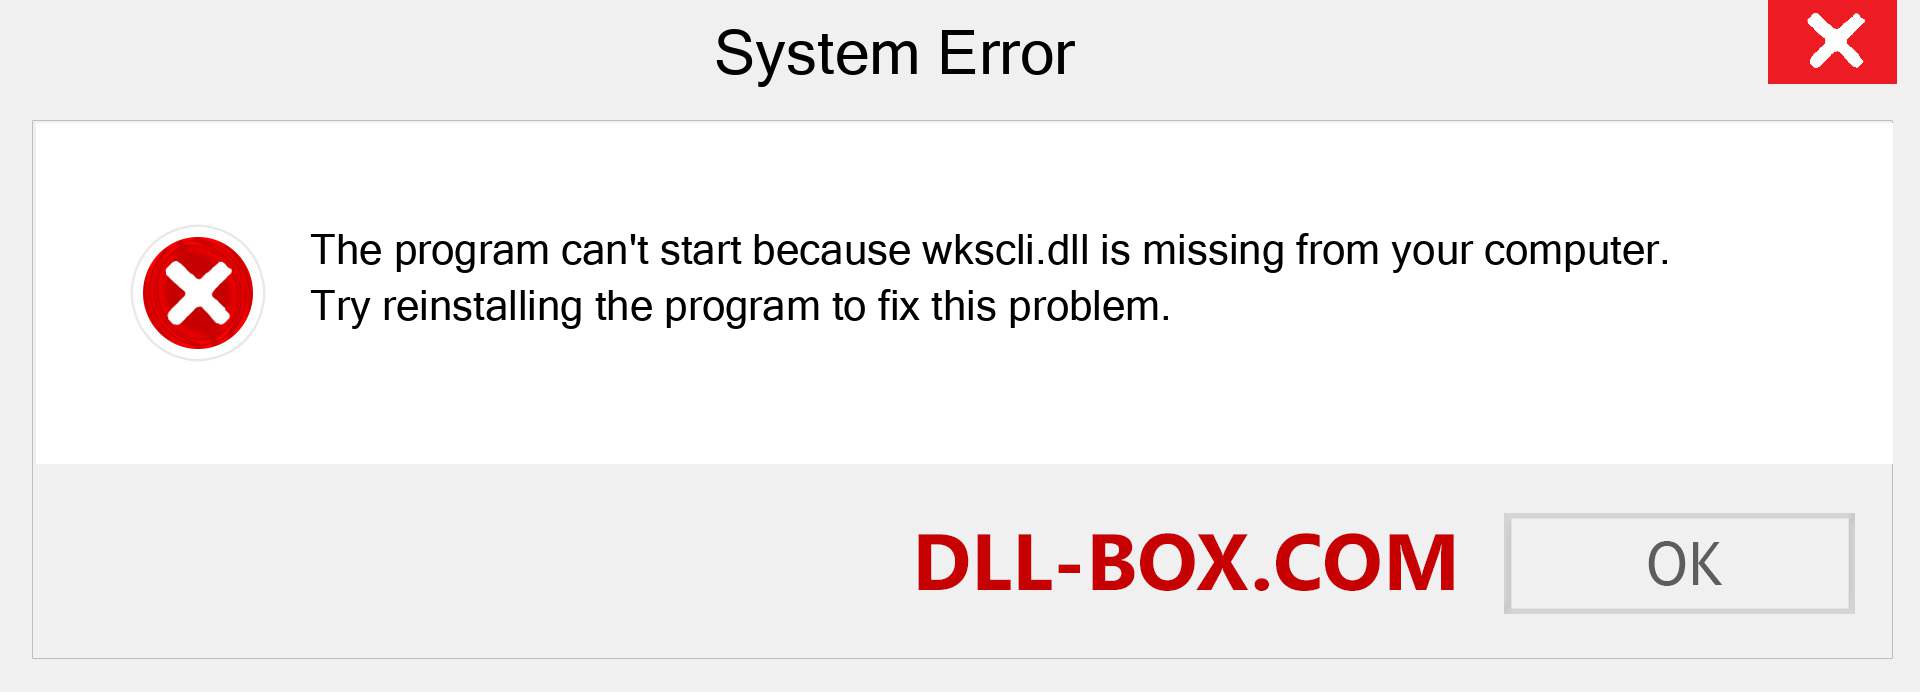  wkscli.dll file is missing?. Download for Windows 7, 8, 10 - Fix  wkscli dll Missing Error on Windows, photos, images